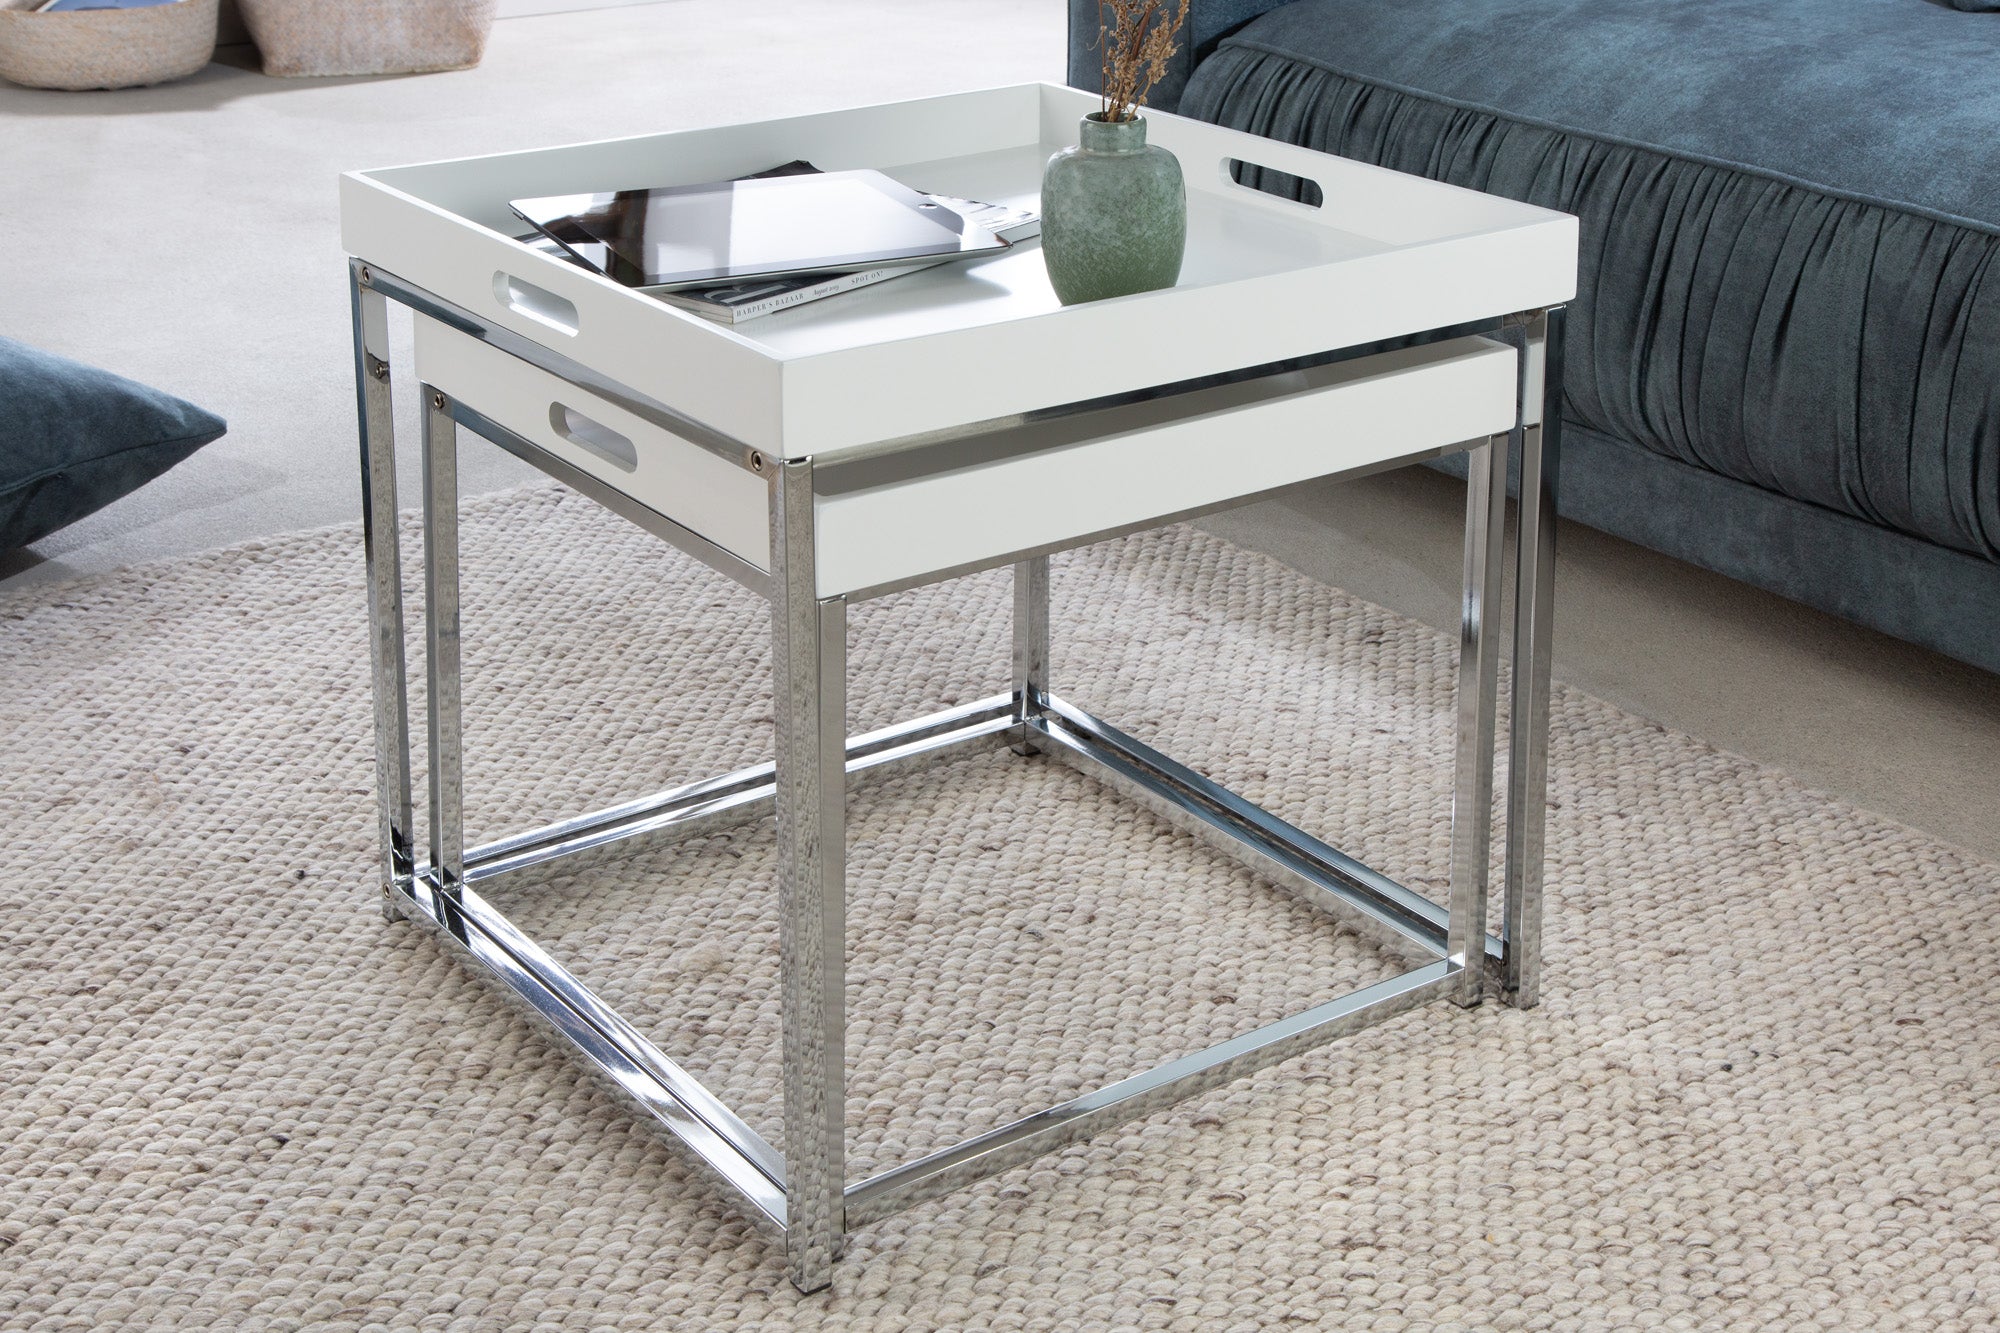 Side Table Elements Tray Set of 2 White Chrome